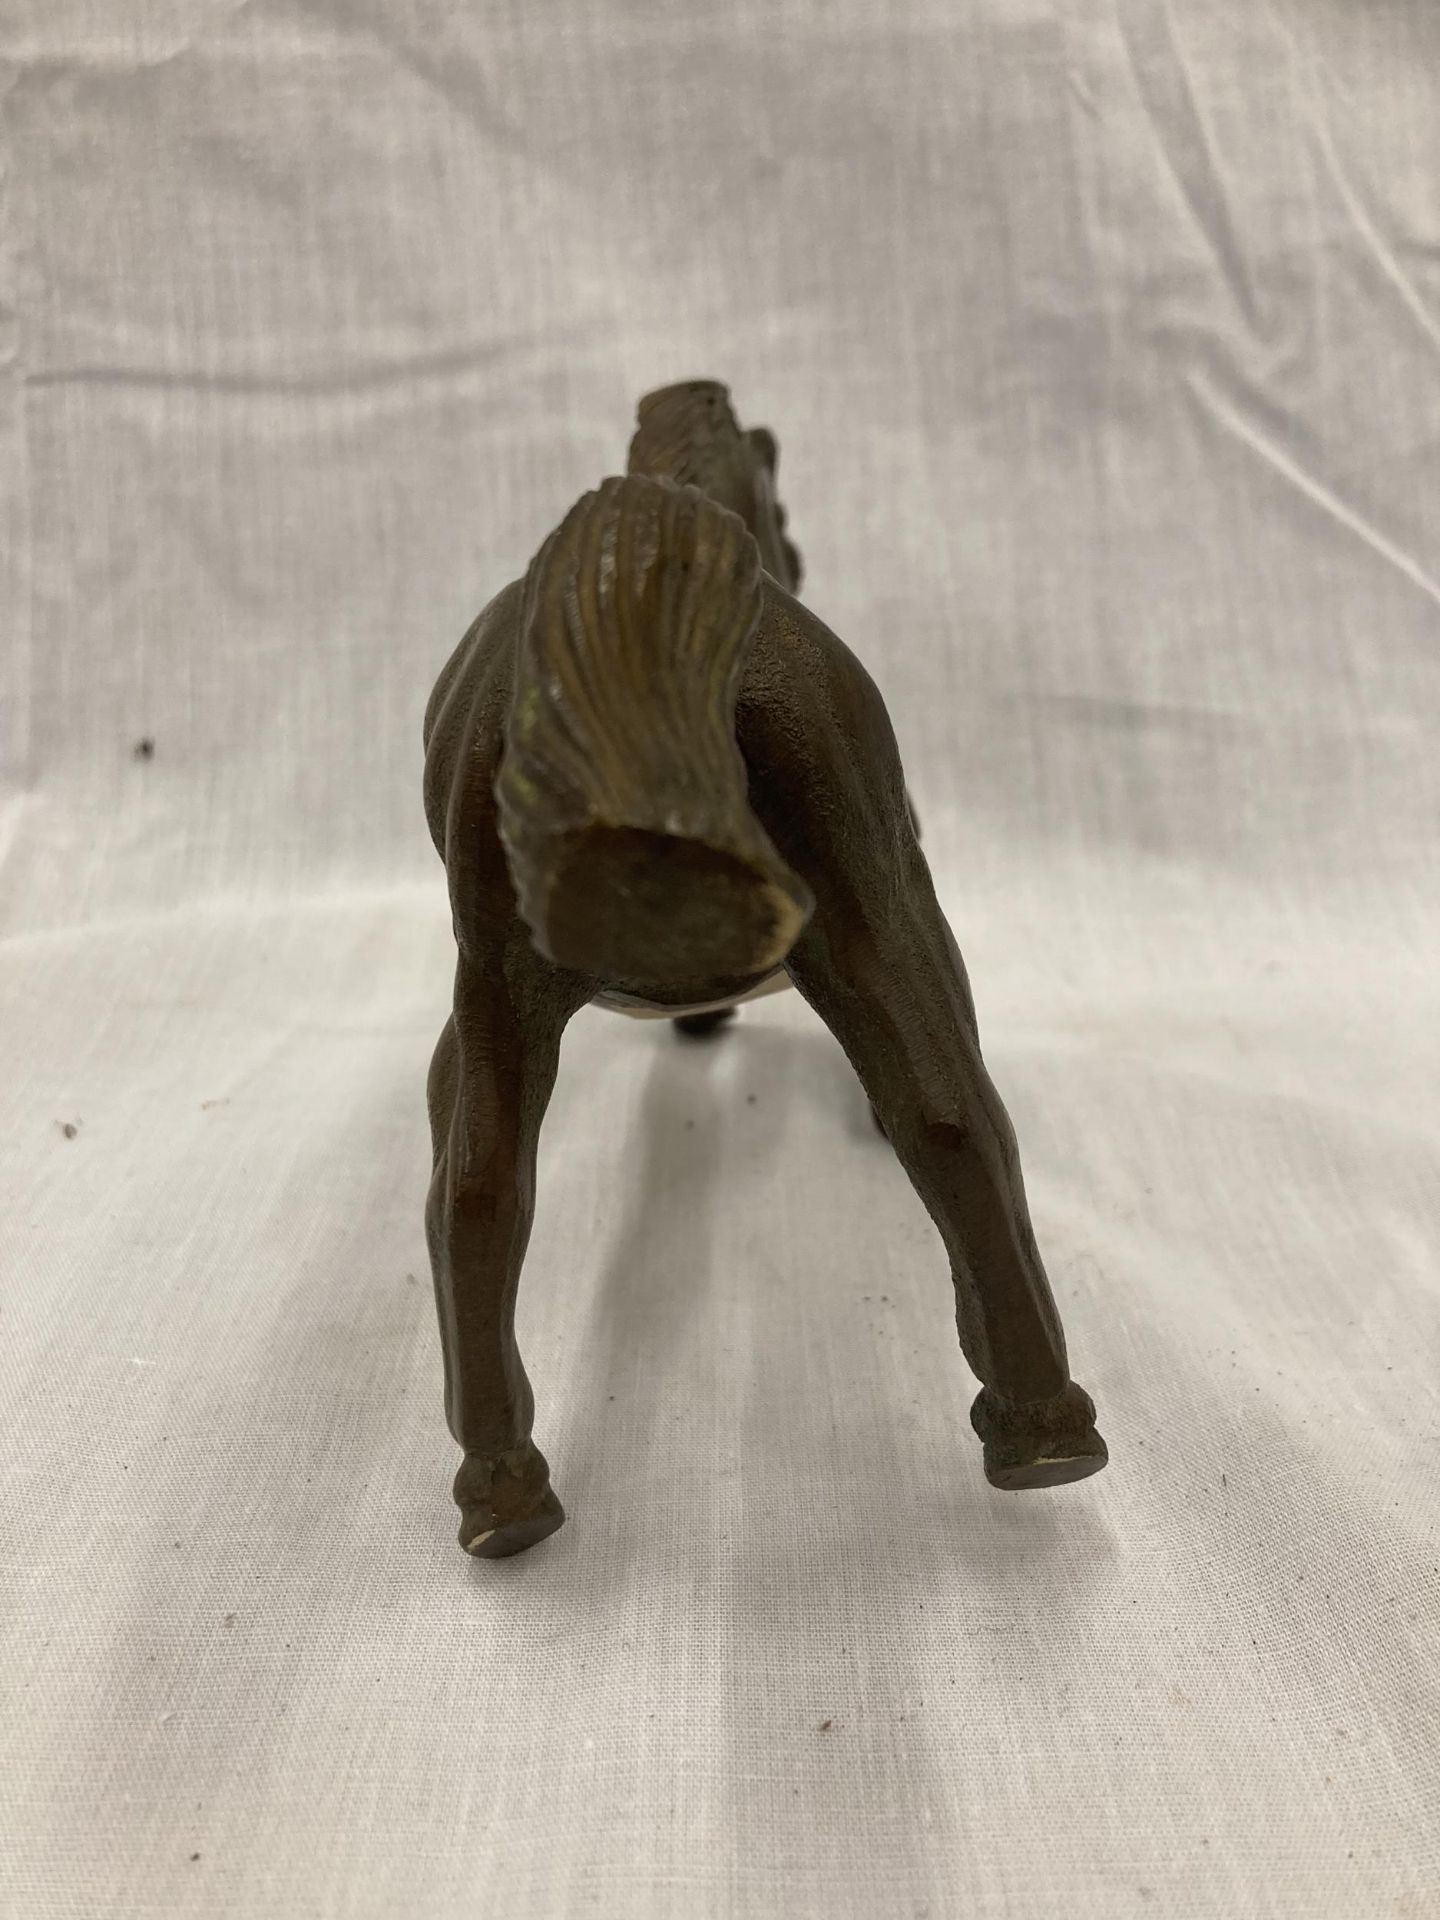 A BRONZE PRANCING HORSE LENGTH 20CM HEIGHT 10CM - Image 7 of 8